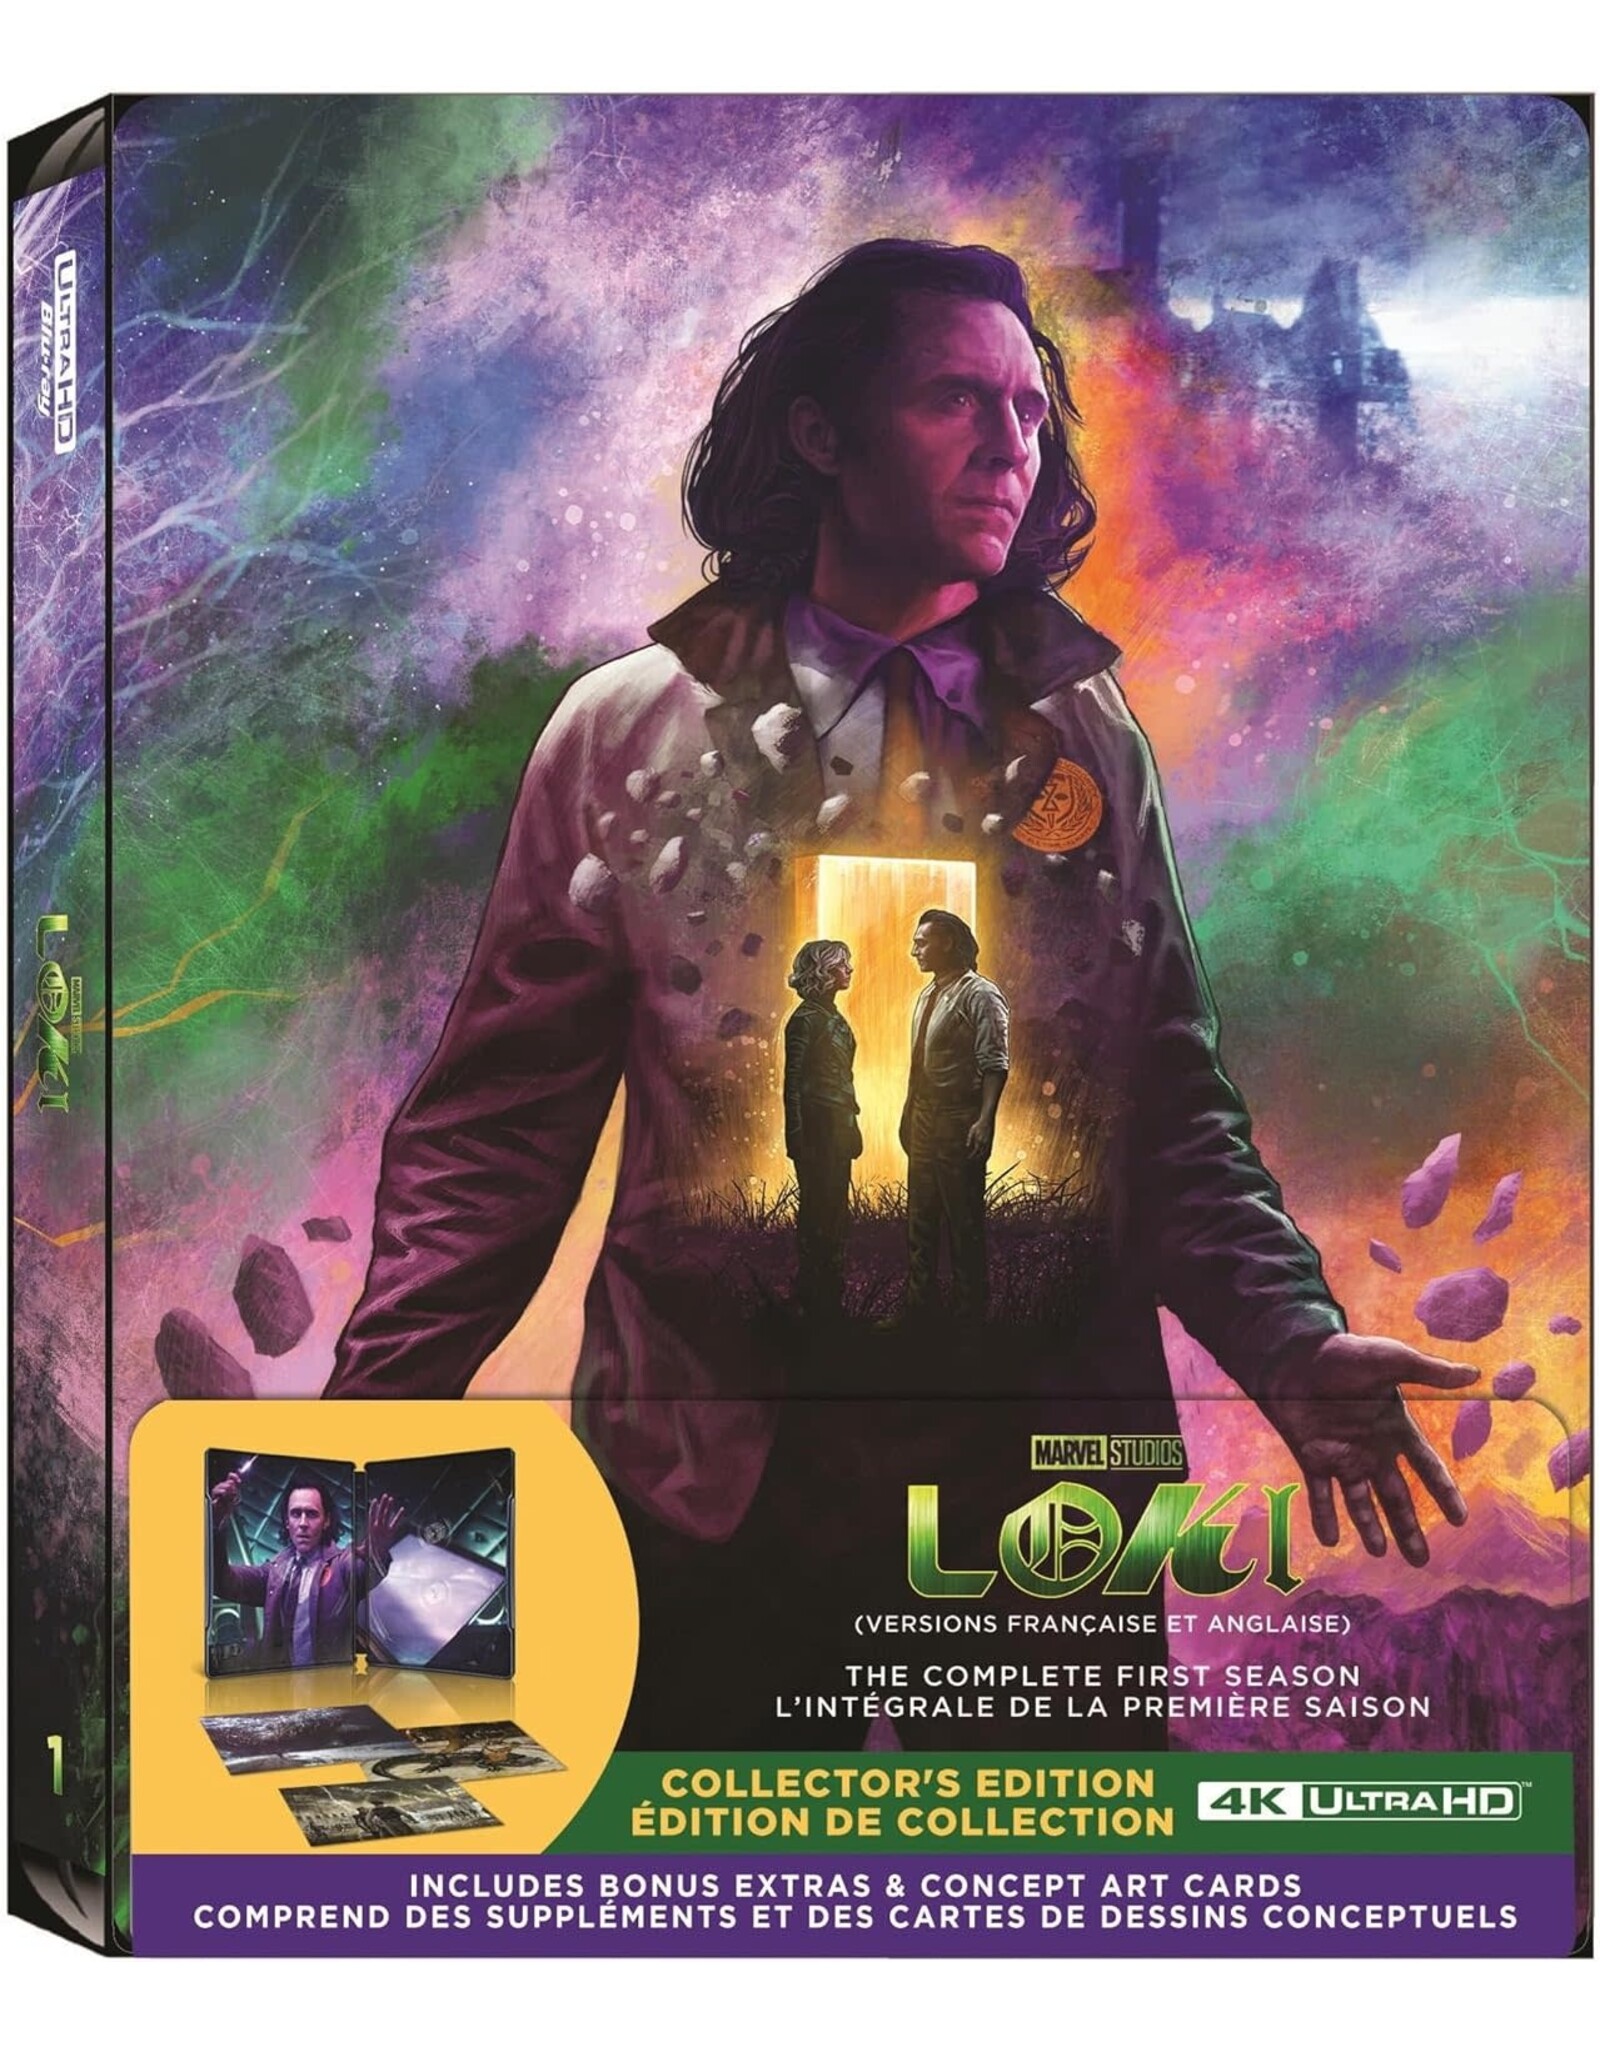 Cult and Cool Loki The Complete First Season - 4K UHD Limited